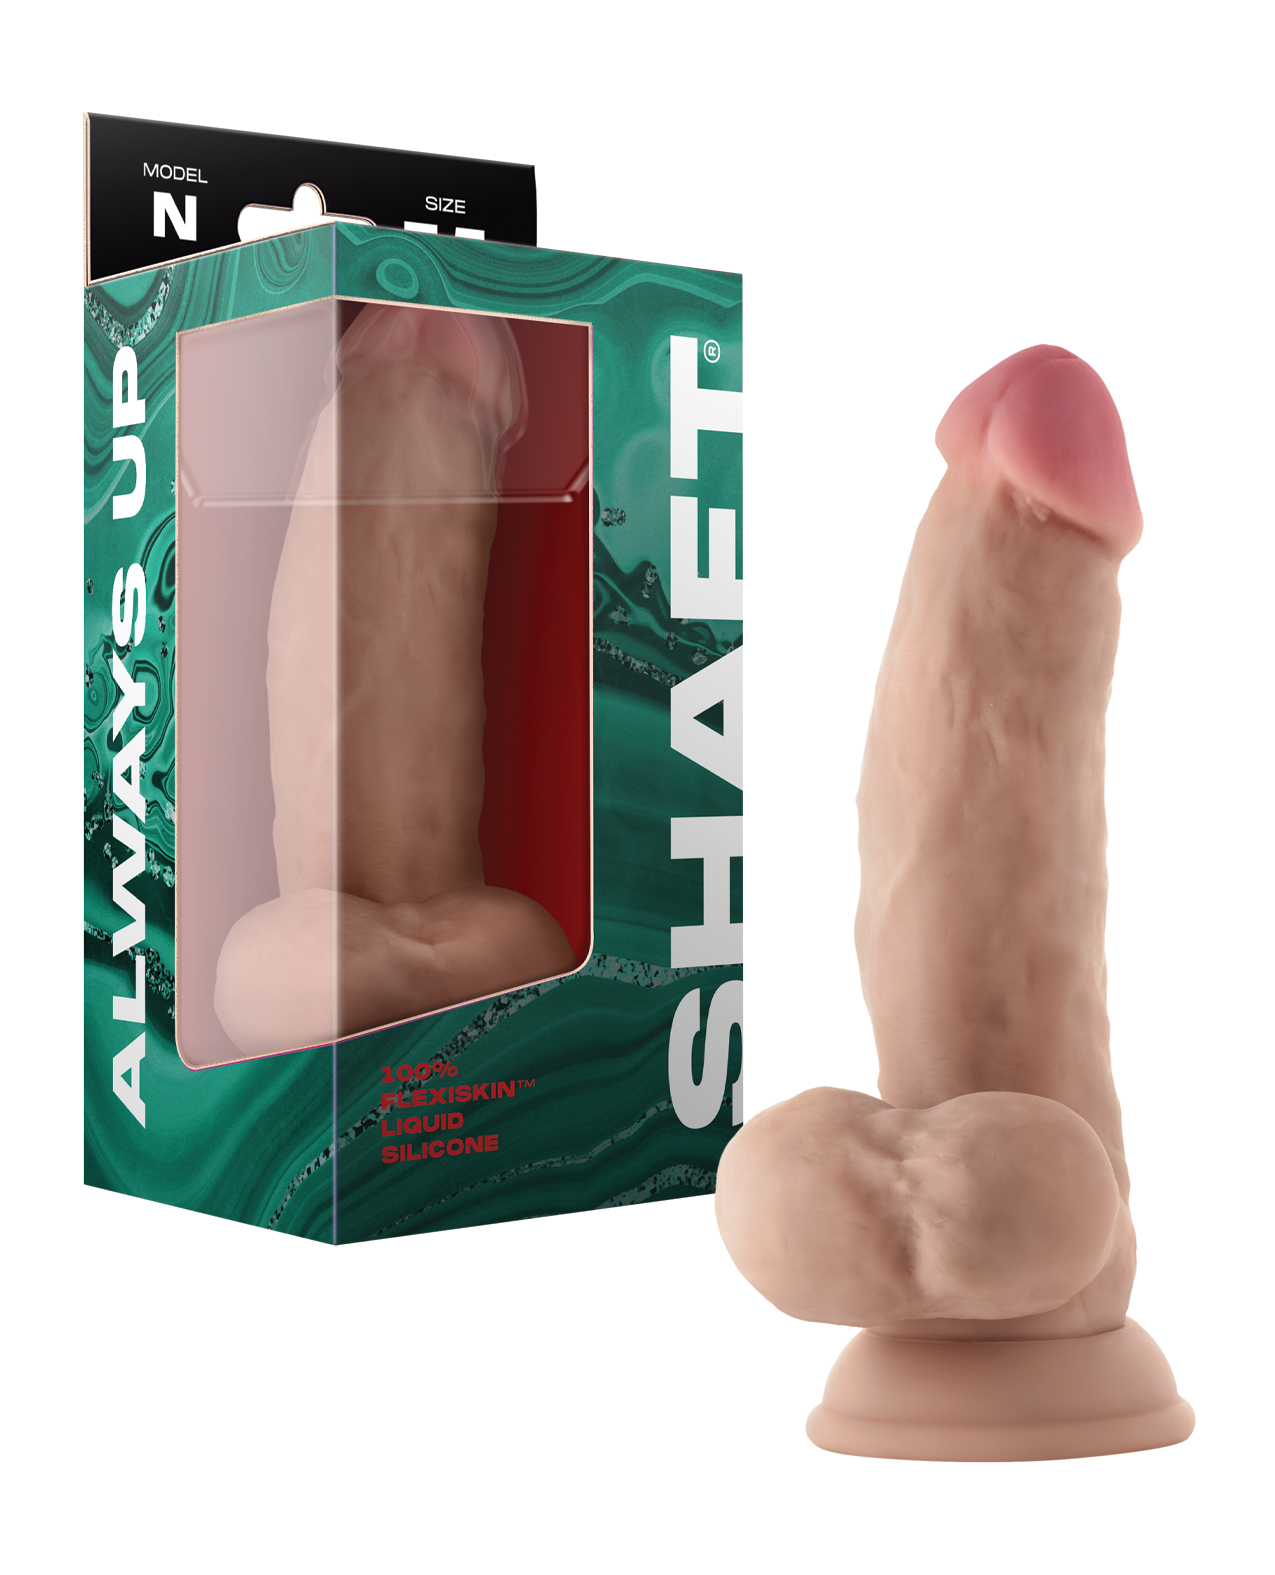 Shaft Model N Flexskin Liquid Silicone 7.5" Side Curve Dong with Balls Pine